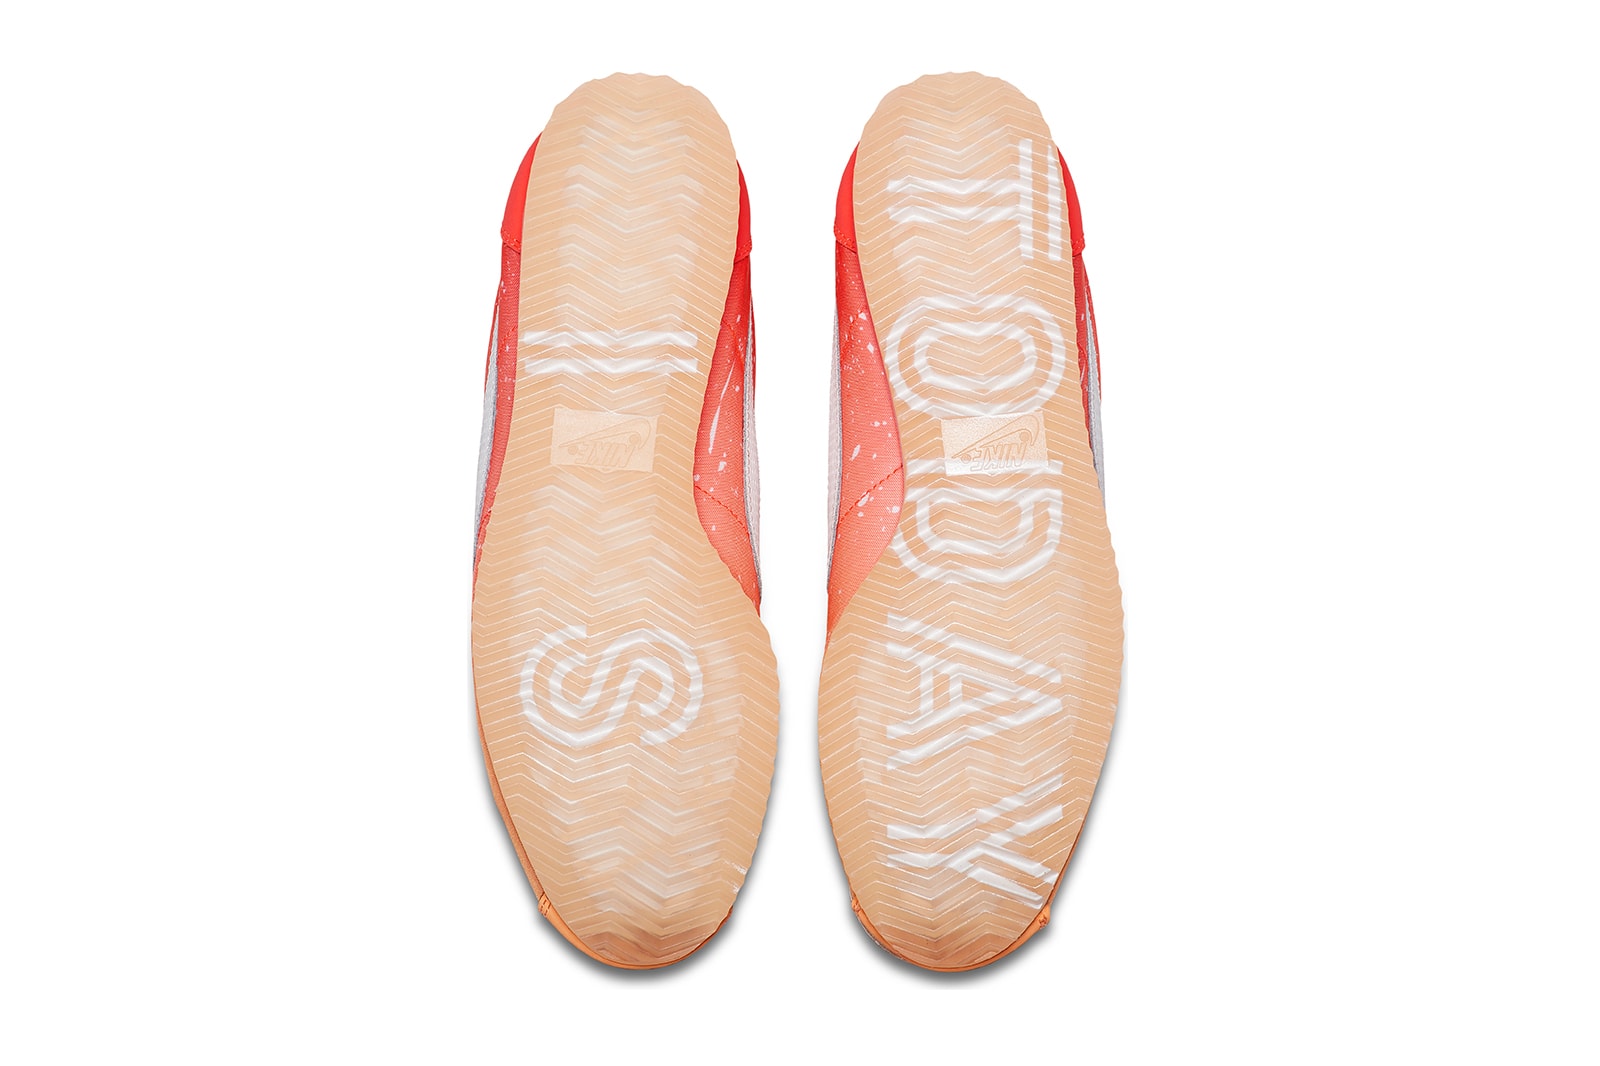 Nike Qixi Chinese Valentine's Day Cortez Classic Nylon Couple Peach Pink Outsole